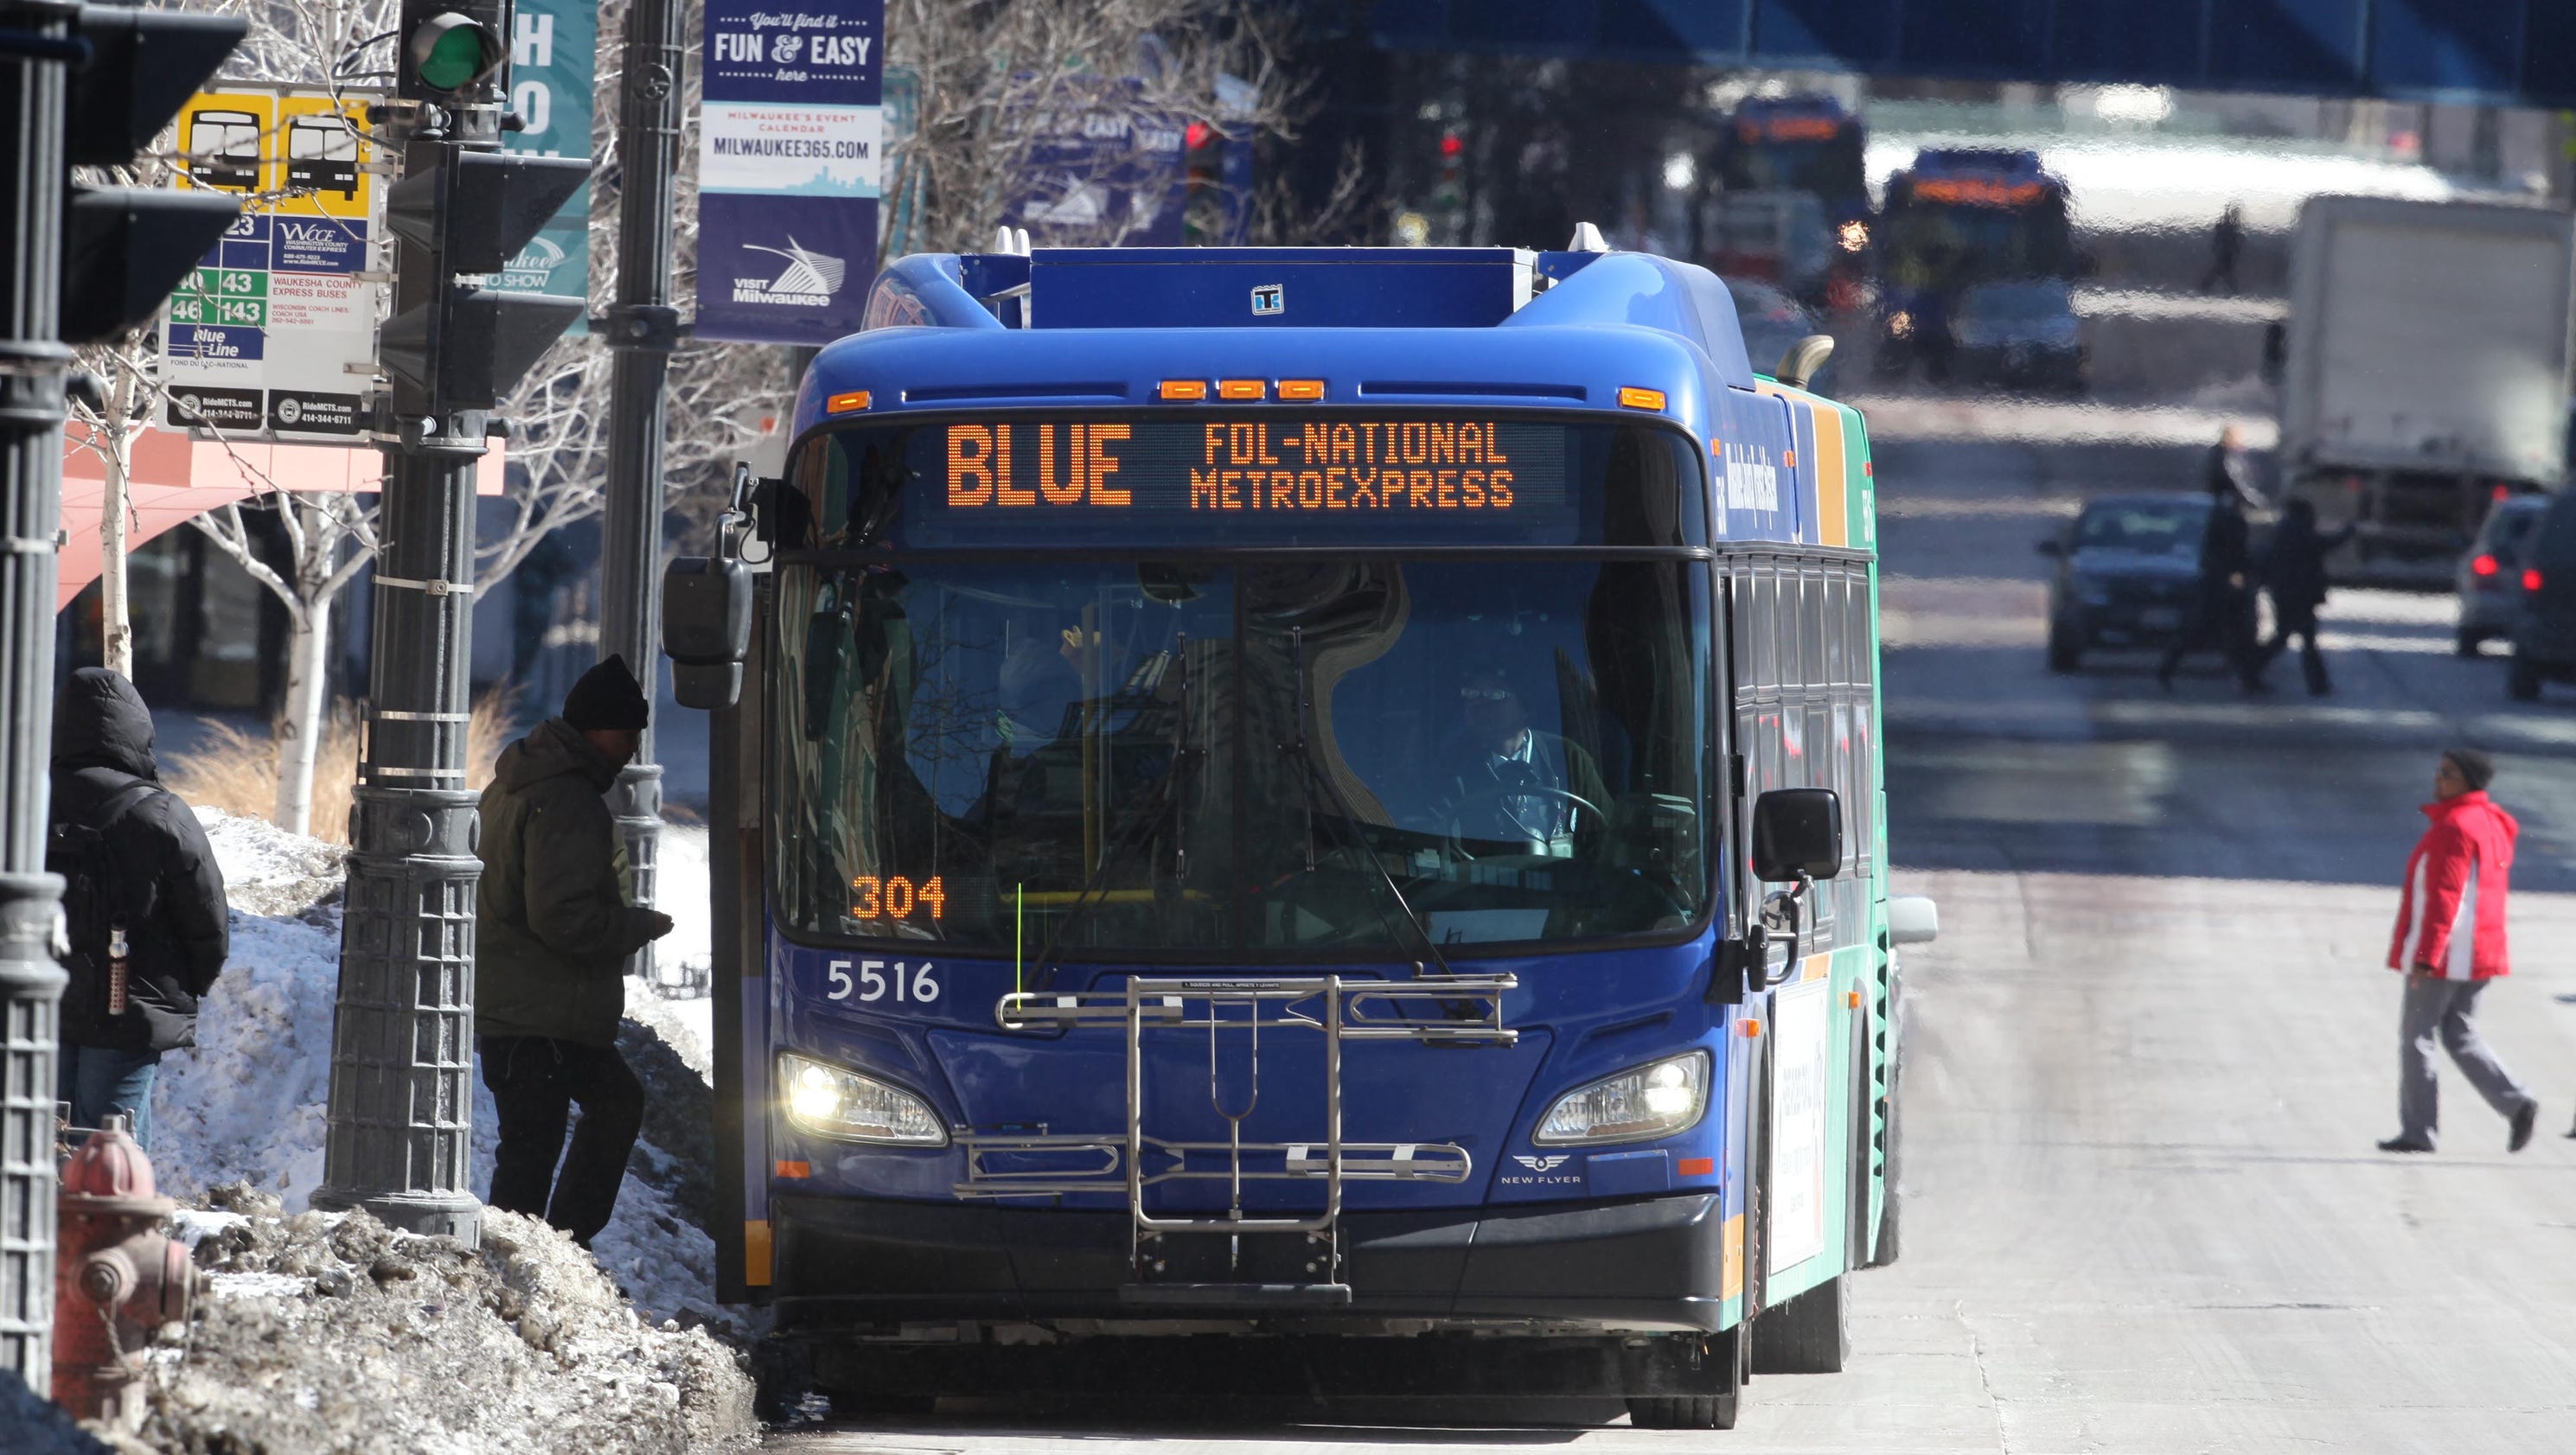 Report: Transit innovations needed to connect Milwaukee area workers to jobs